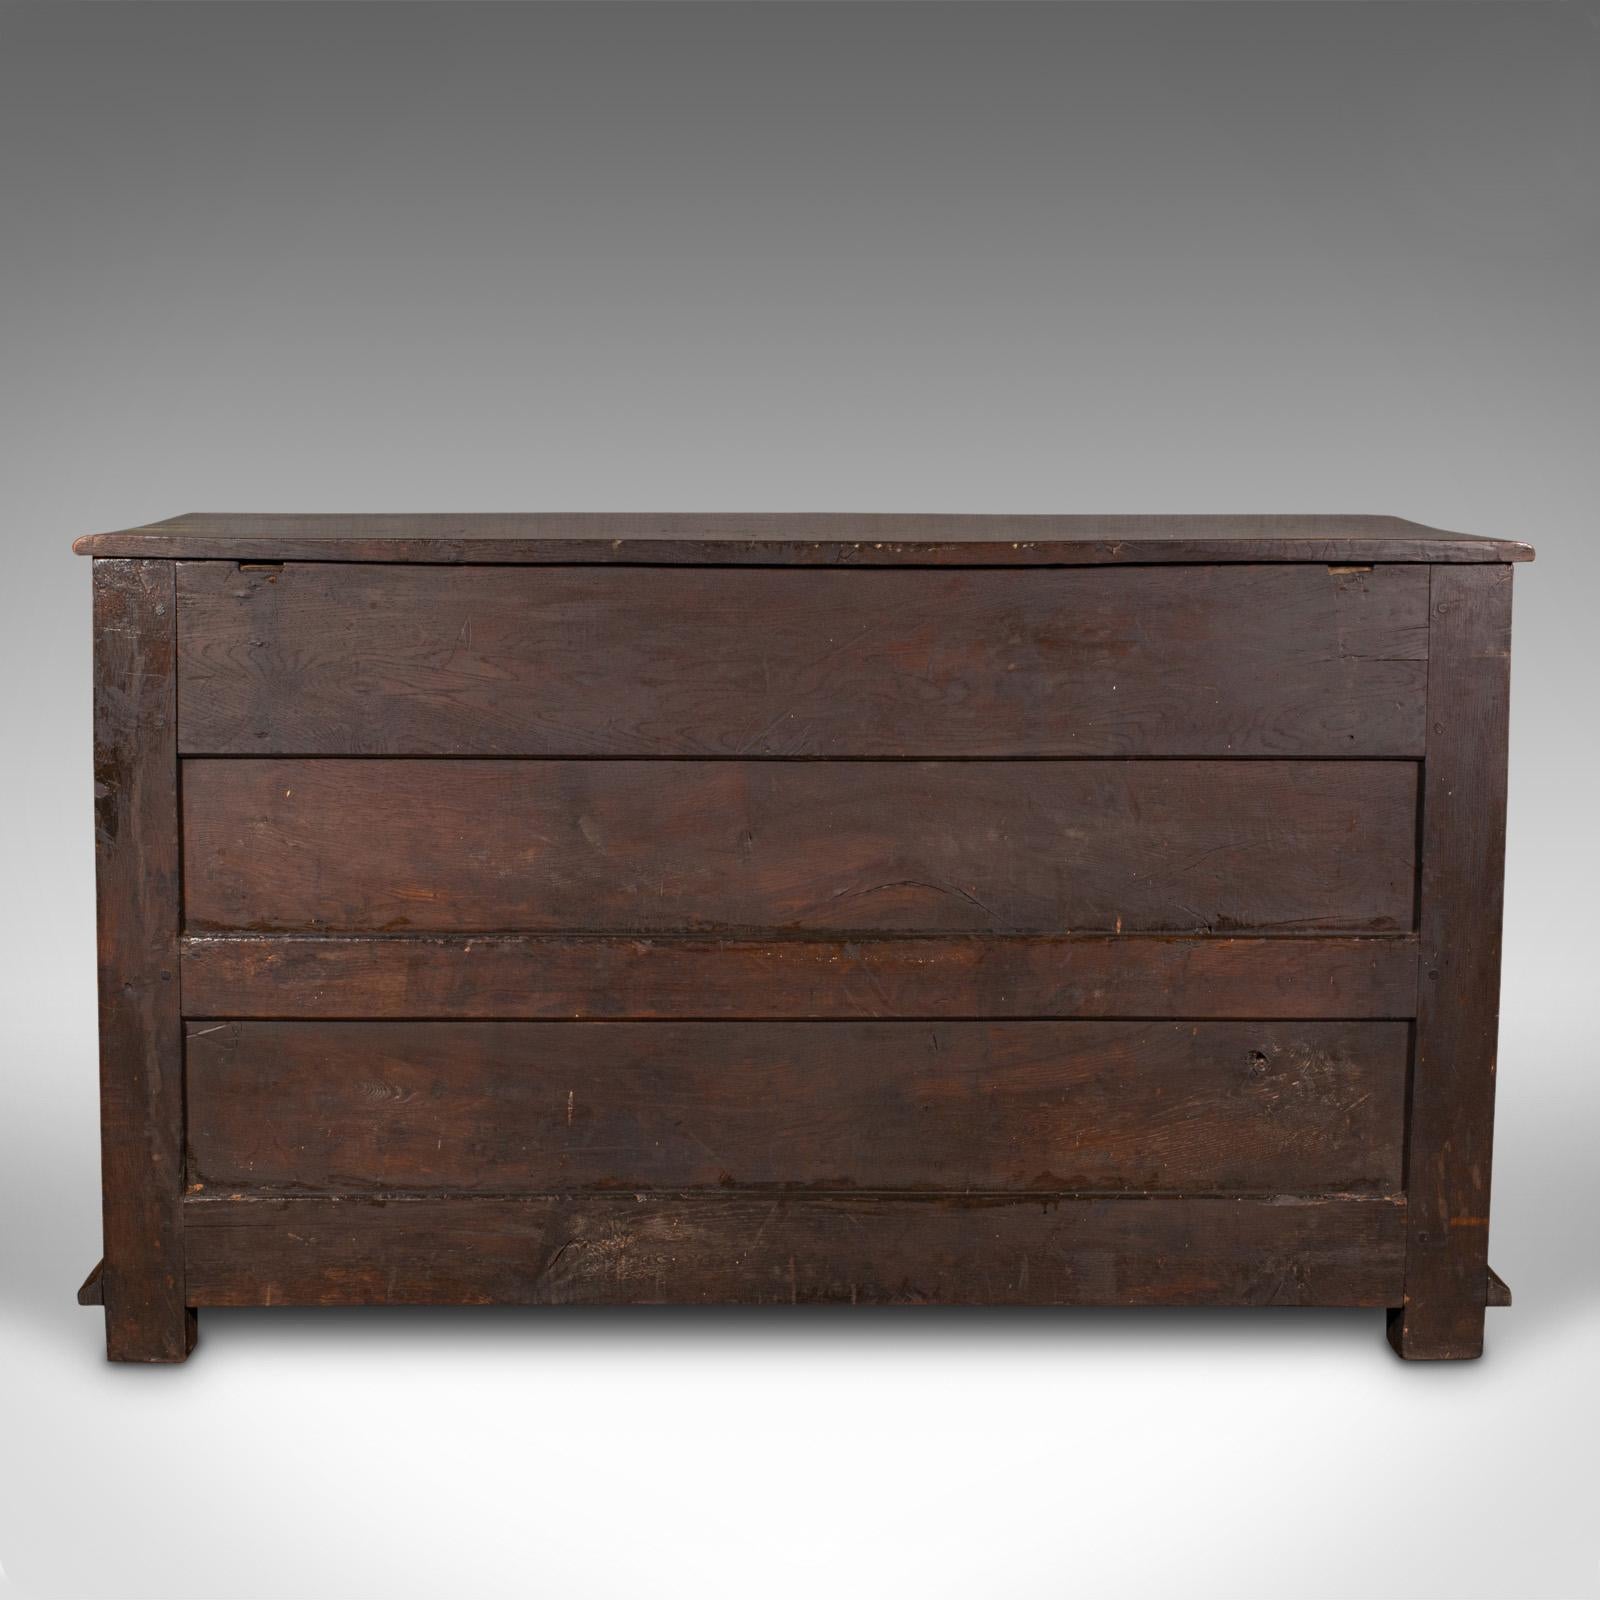 Early 19th Century Antique Country Housekeeper's Cabinet, English Oak, Dresser Base, Georgian, 1800